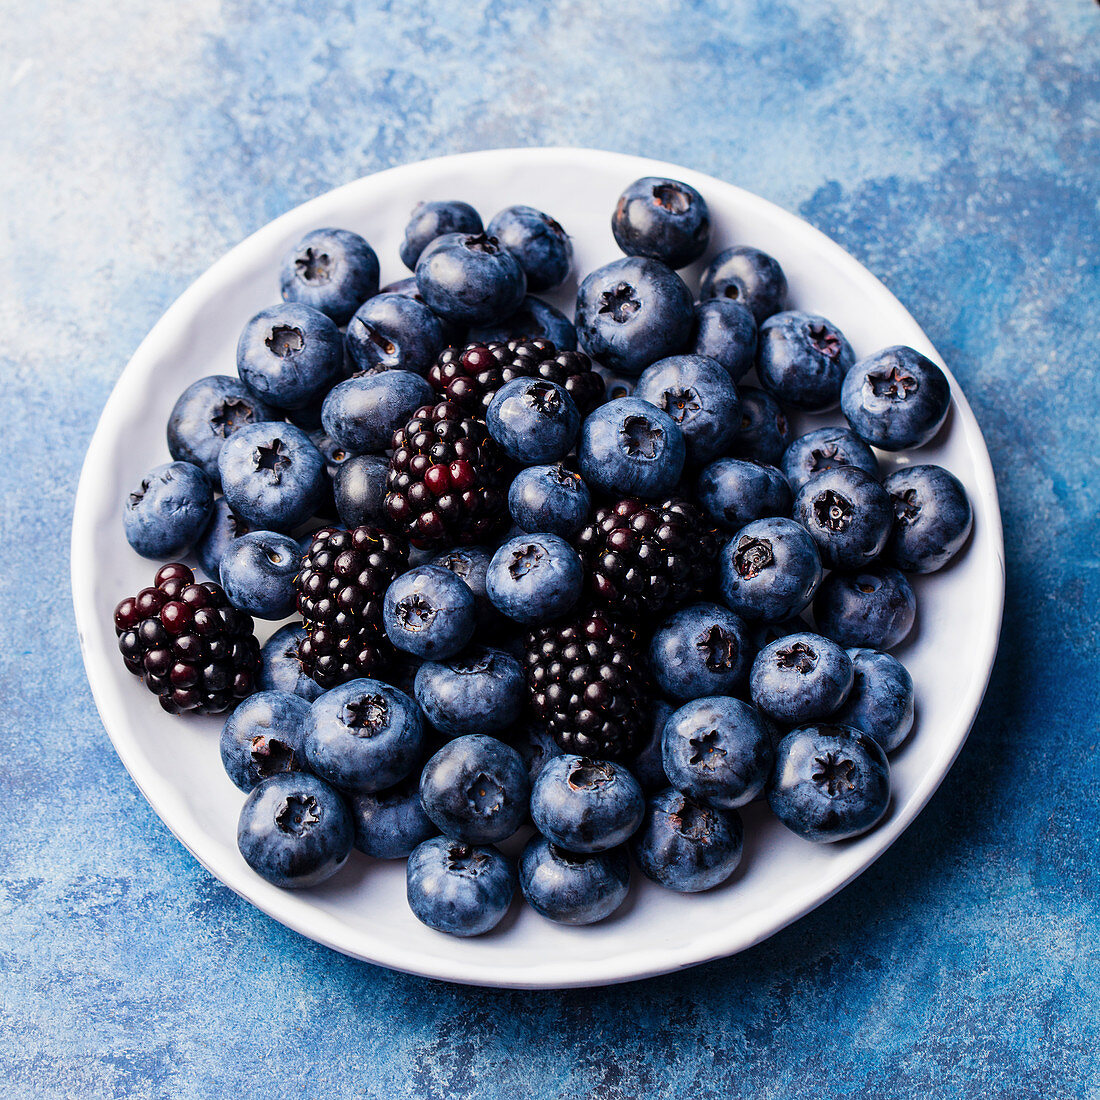 Blueberry and blackberry berries on a white plate on blue stone background